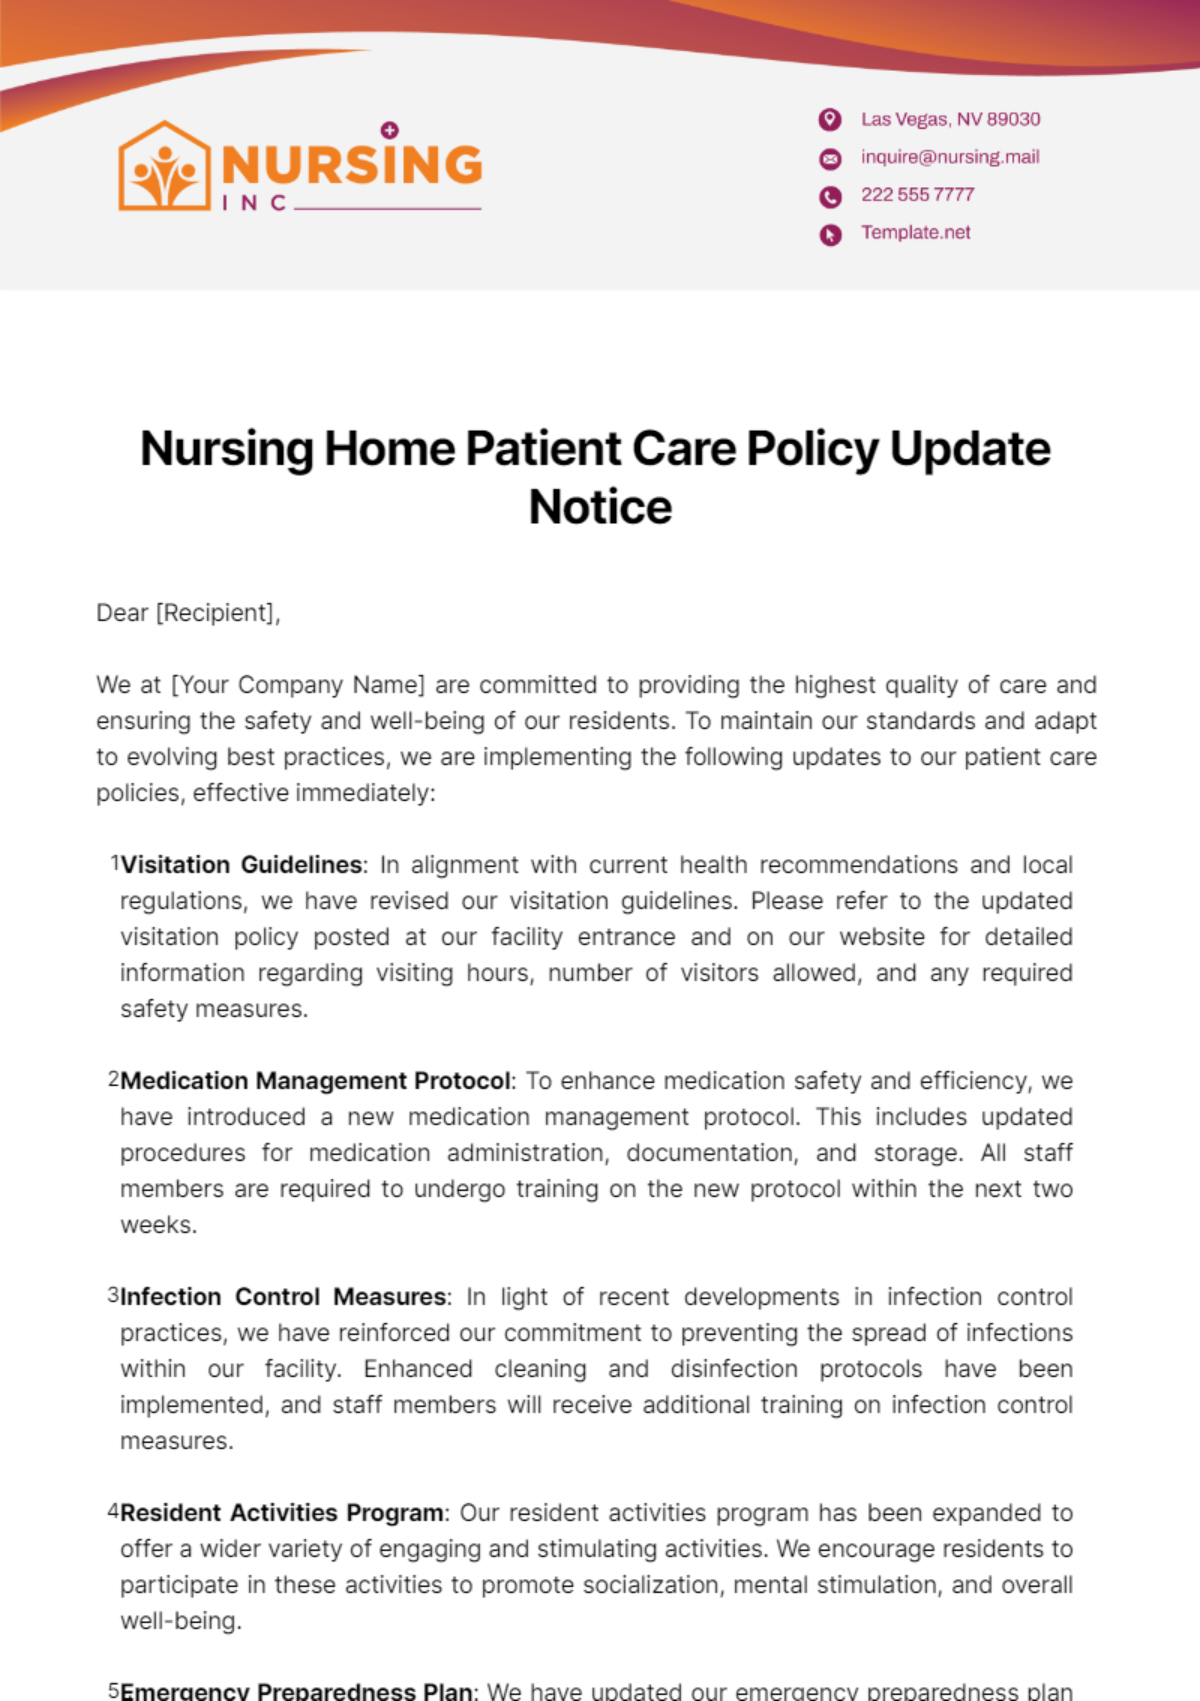 Nursing Home Patient Care Policy Update Notice Template